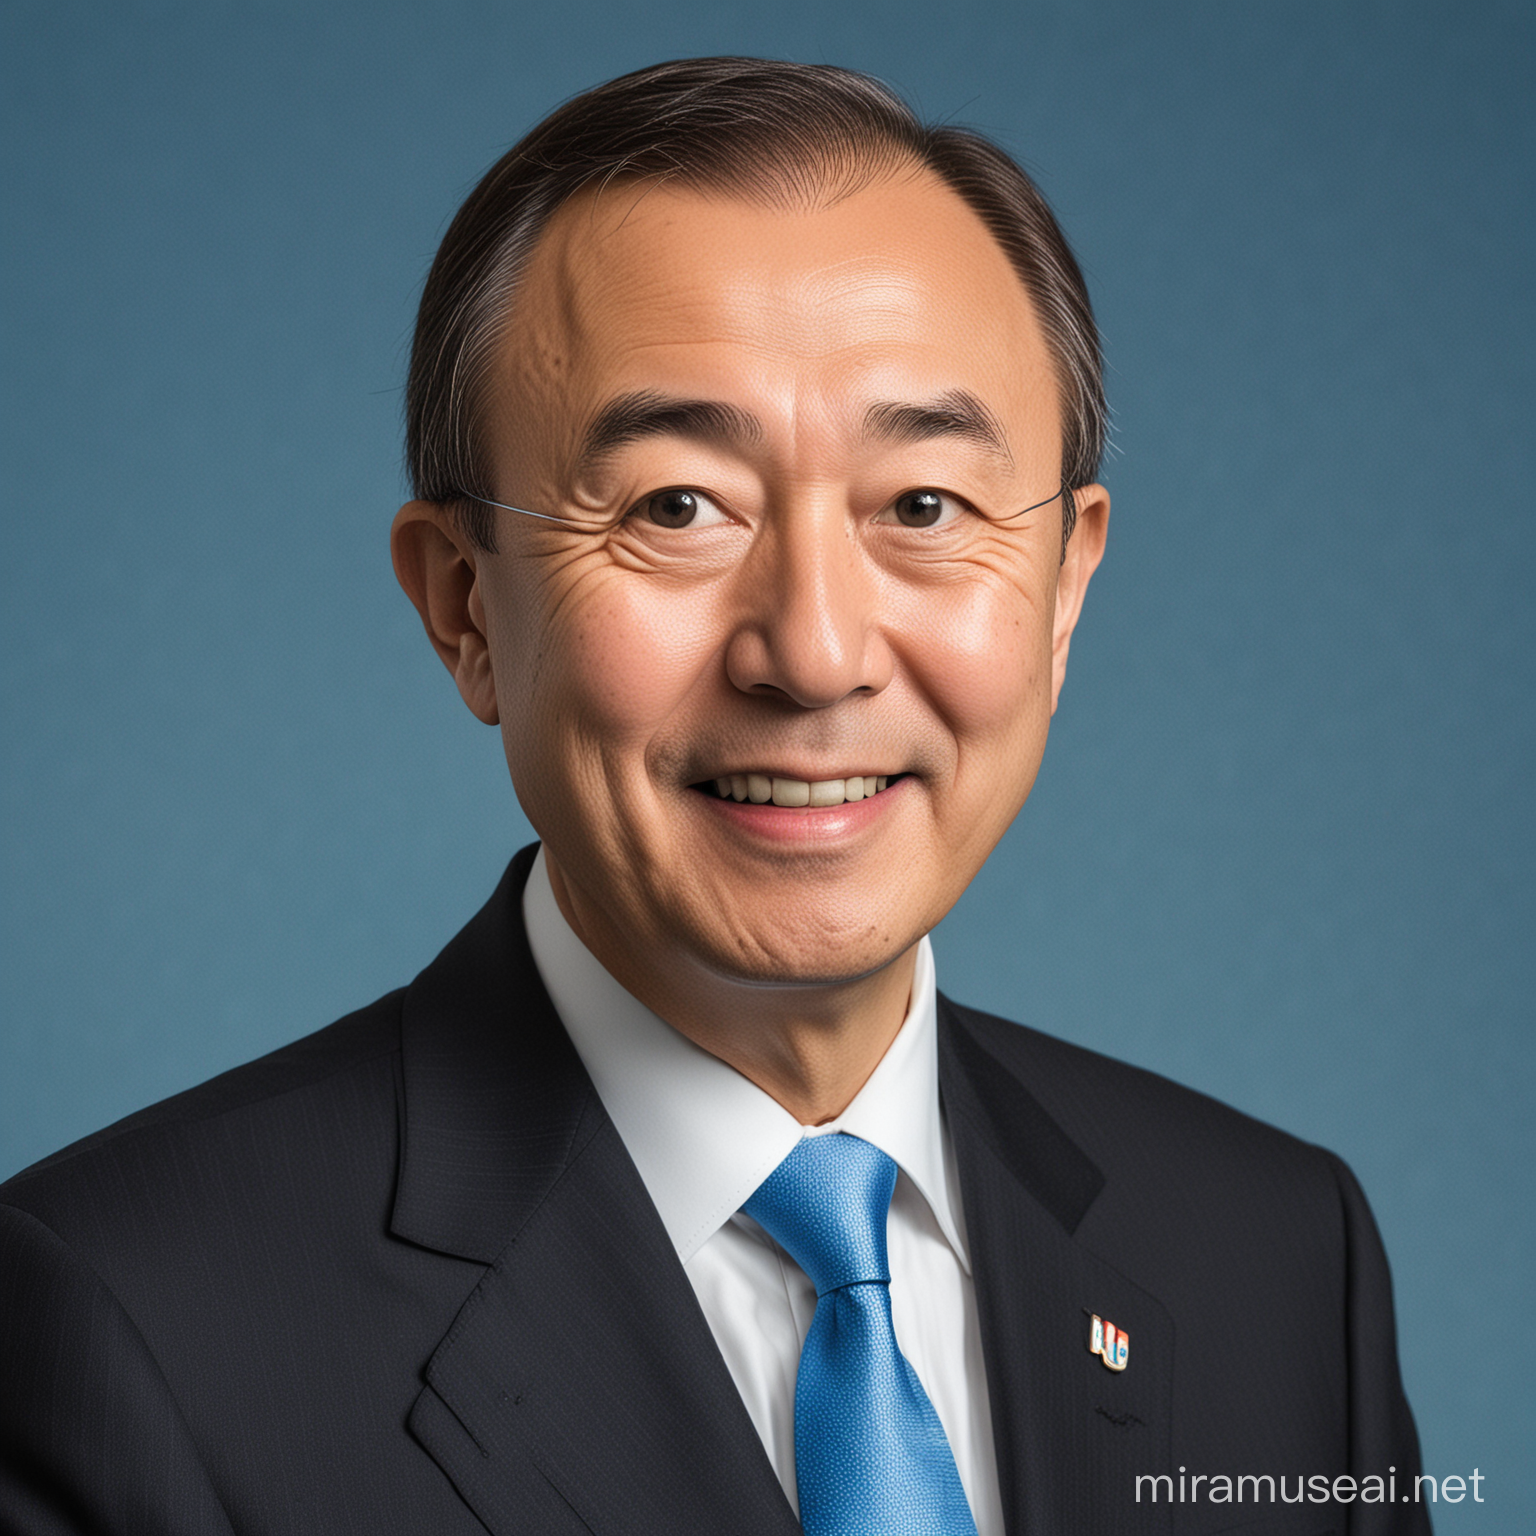 Ban Kimoon United Nations Secretary General Portrait with Blue Background